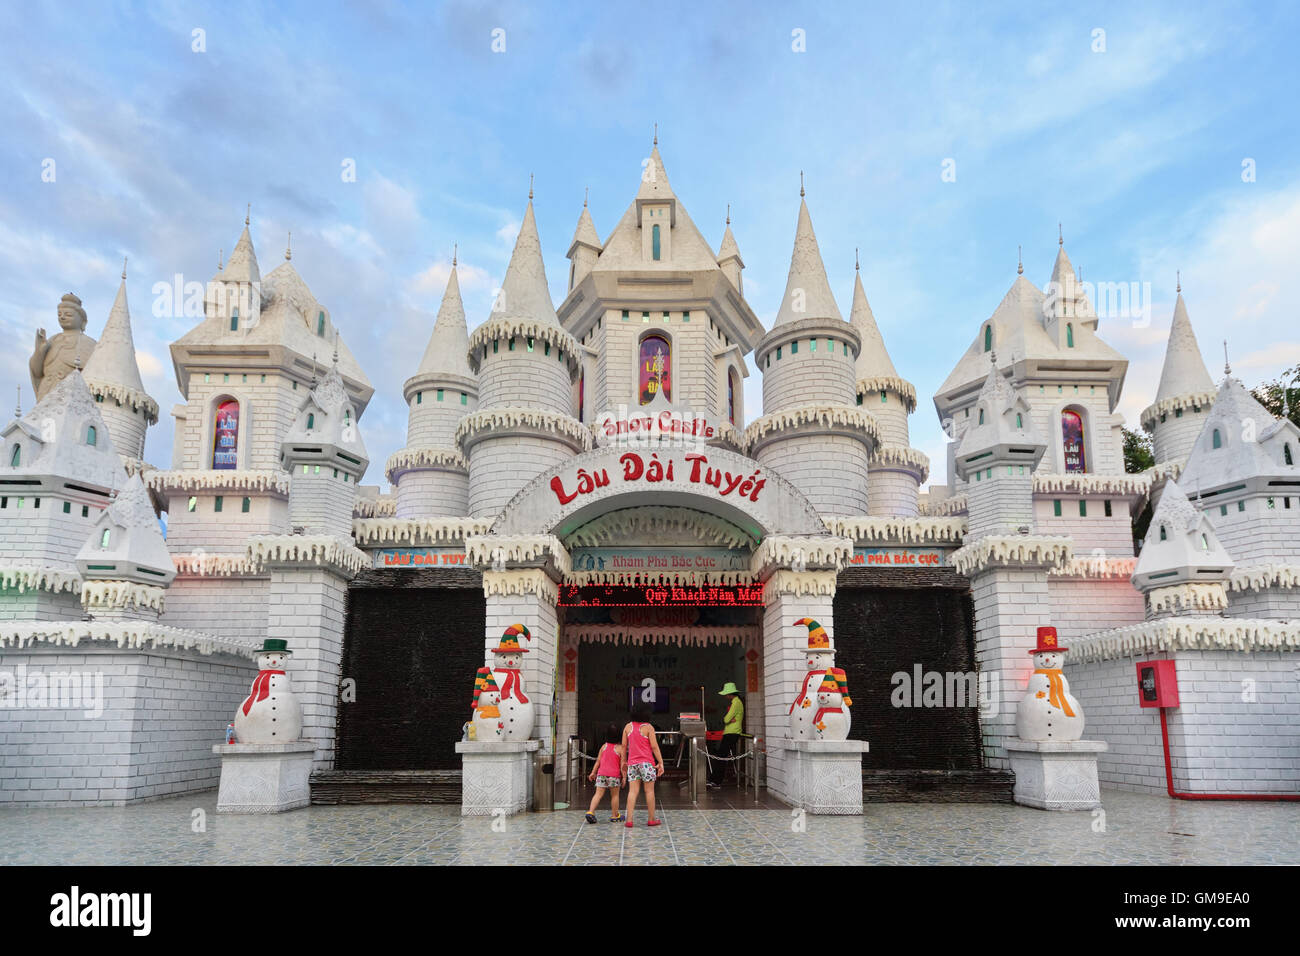 Ho Chi Minh city ( Saigon ), Vietnam - September 02, 2015: Two girls visit snow castle in children water park and historical the Stock Photo